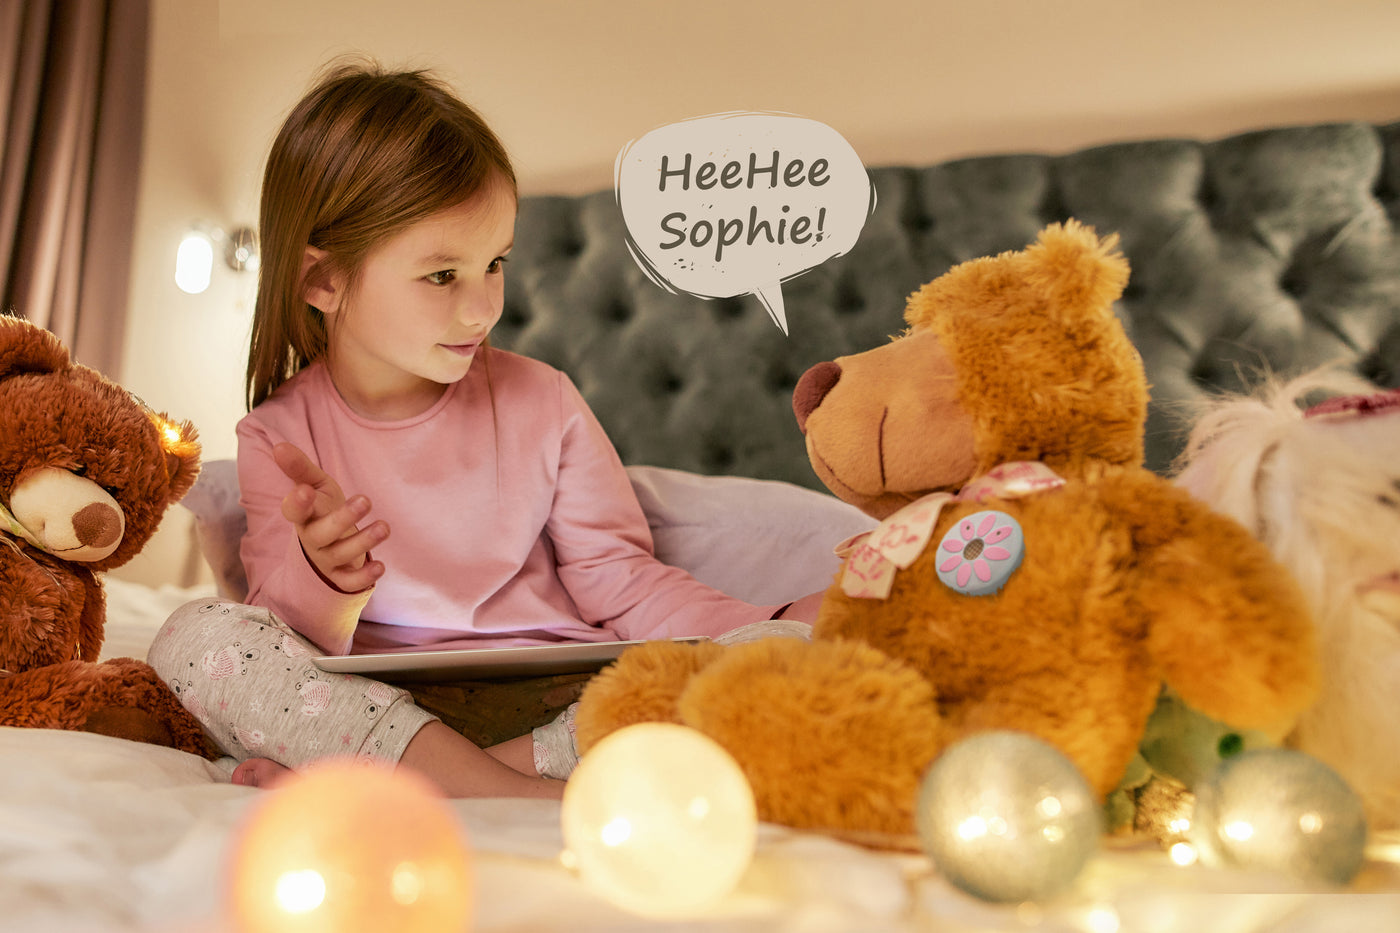 Alecto Baby HeeHee - Chat button, makes your cuddly toy an interactive friend